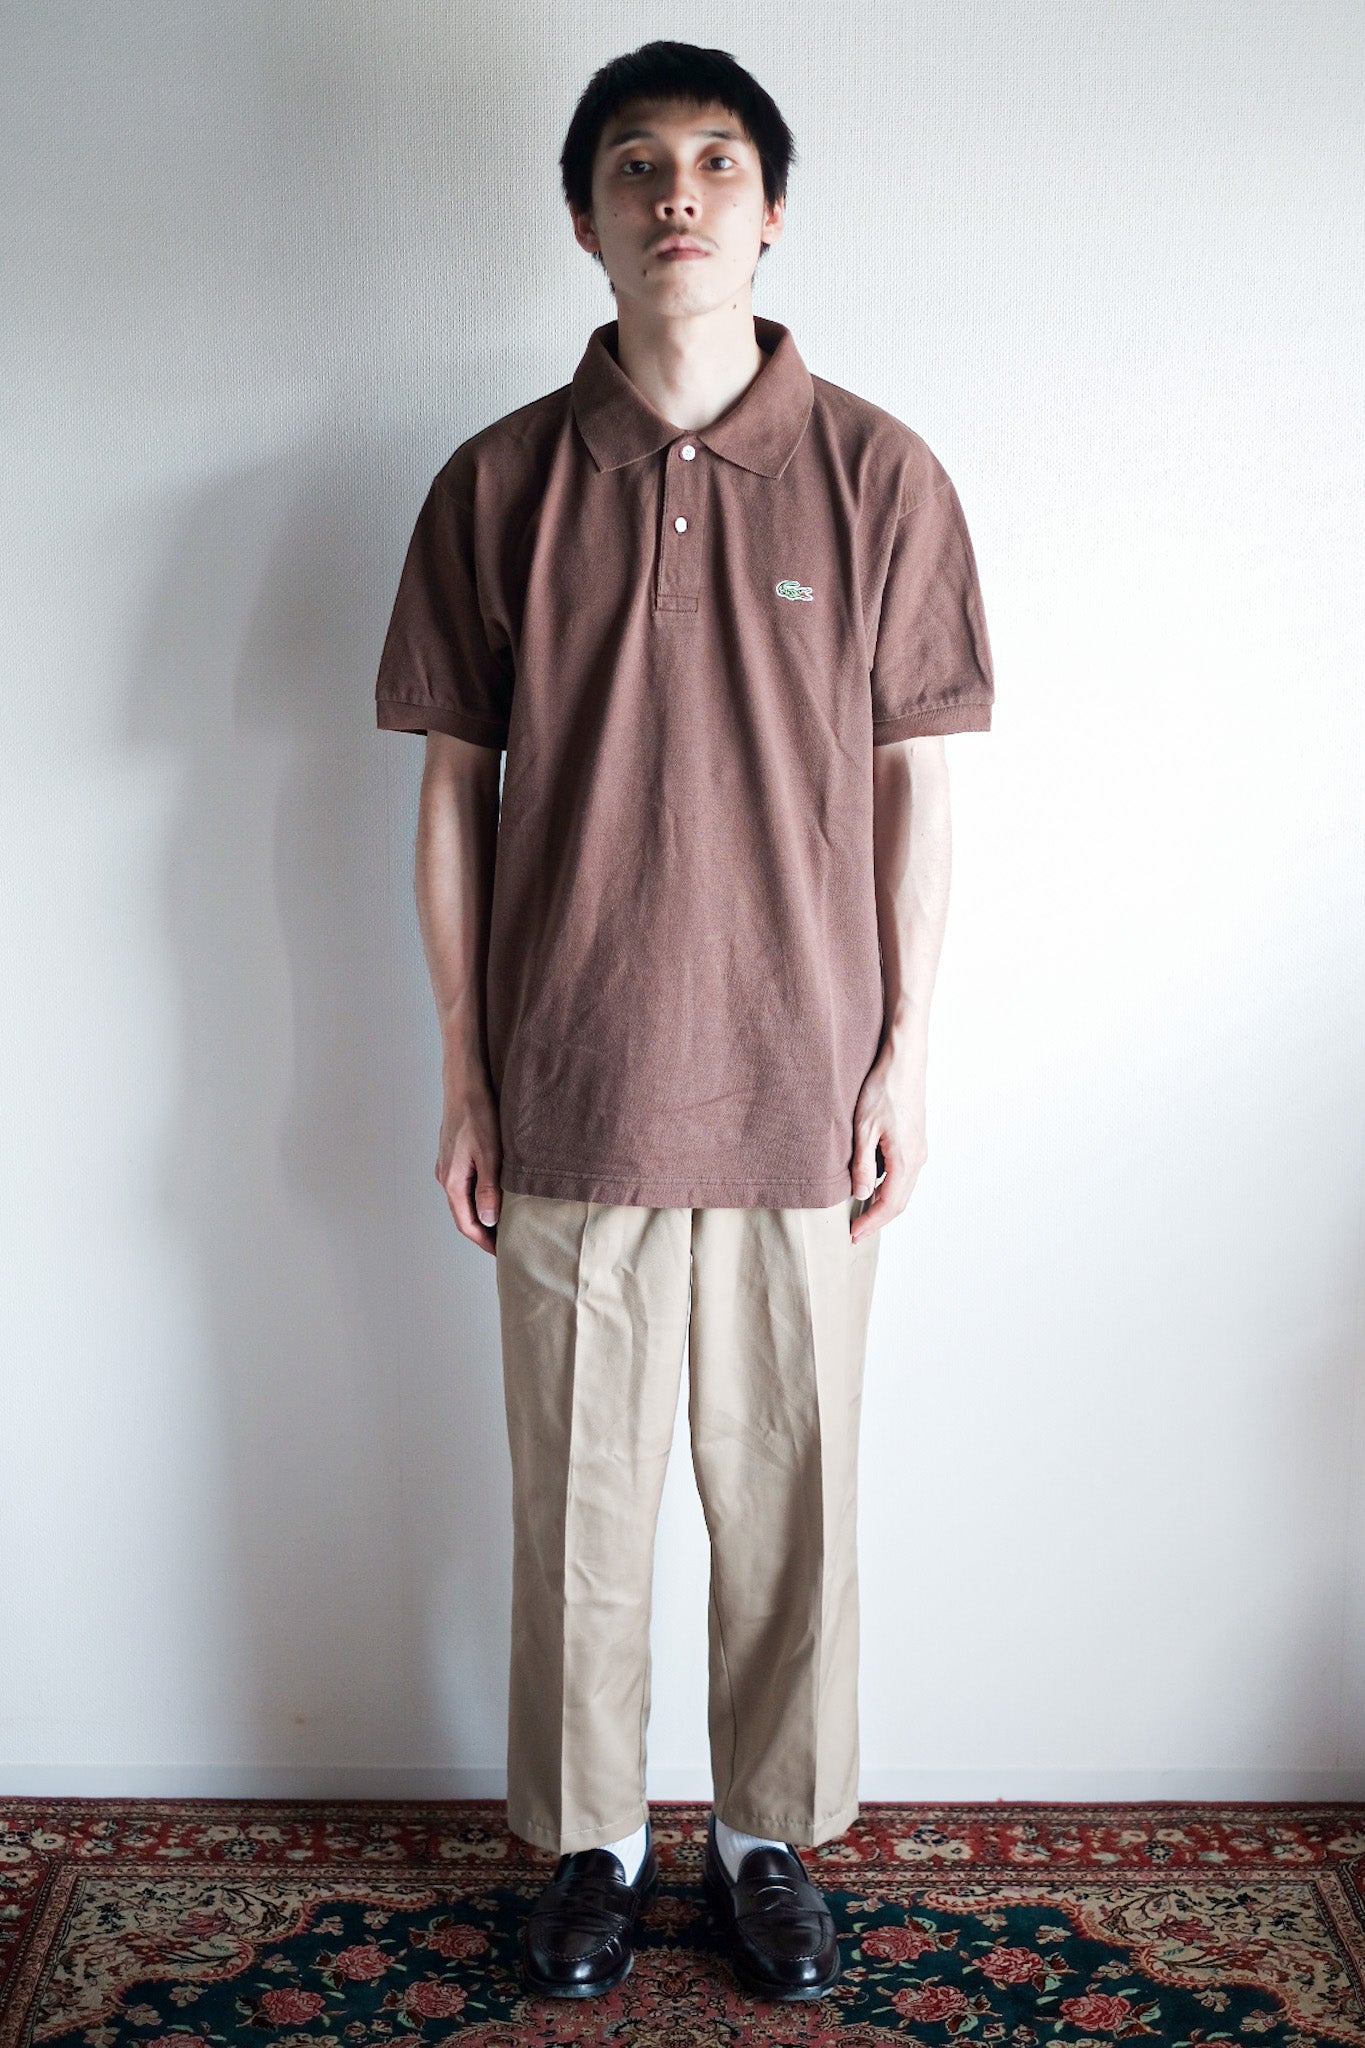 [~ 80's] Chemise Lacoste S / S Polo Taille.6 "Brown"